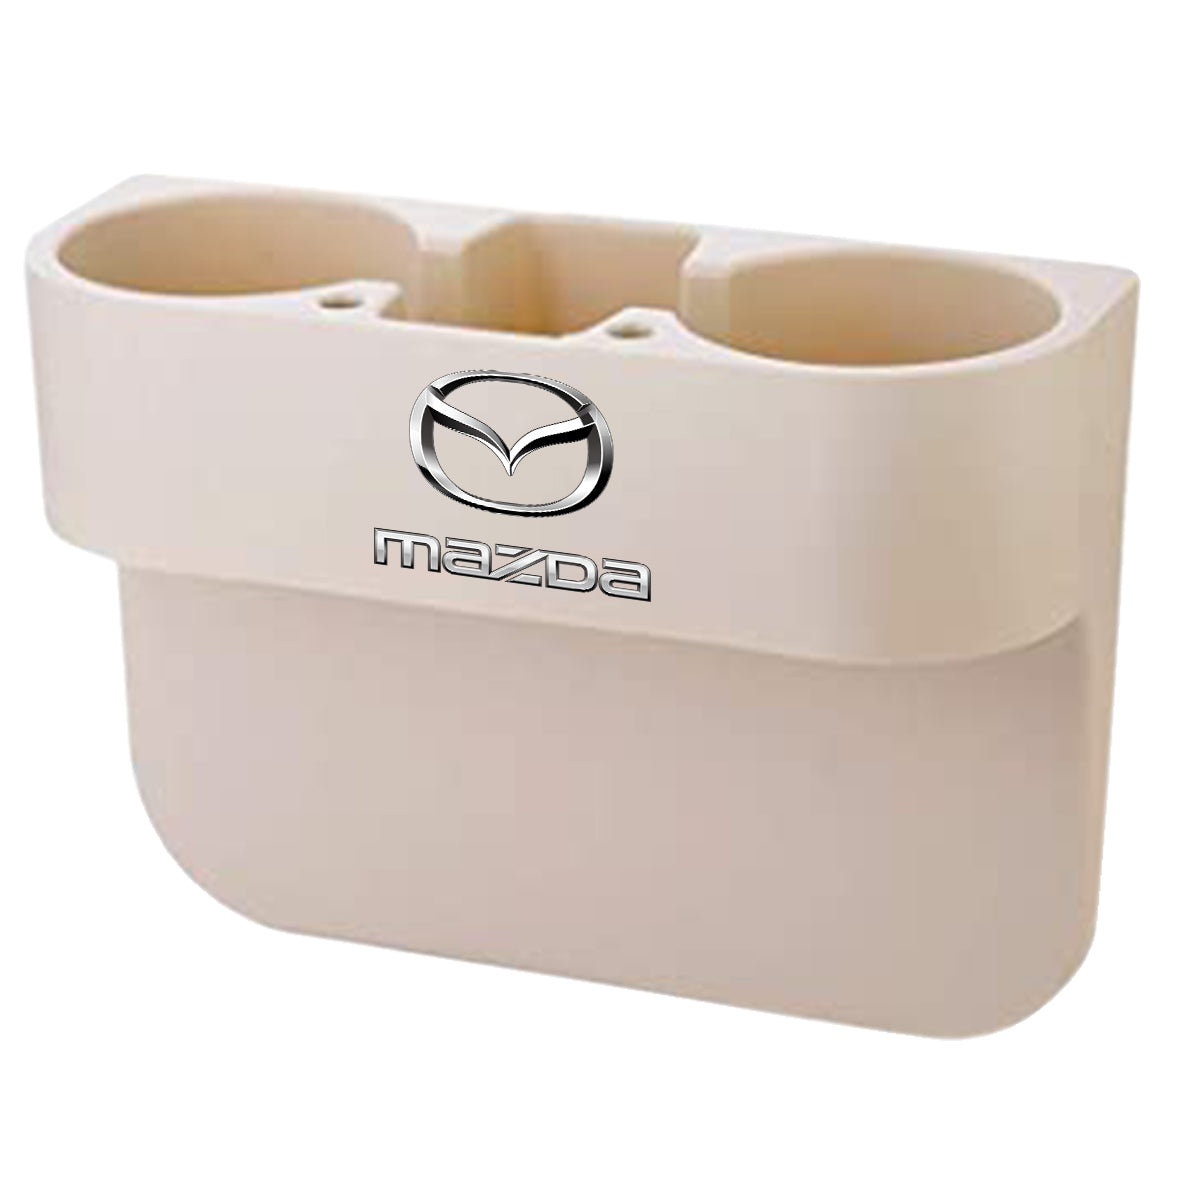 Mazda Car Cup Holder: Convenient and Secure Beverage Storage for Your Vehicle